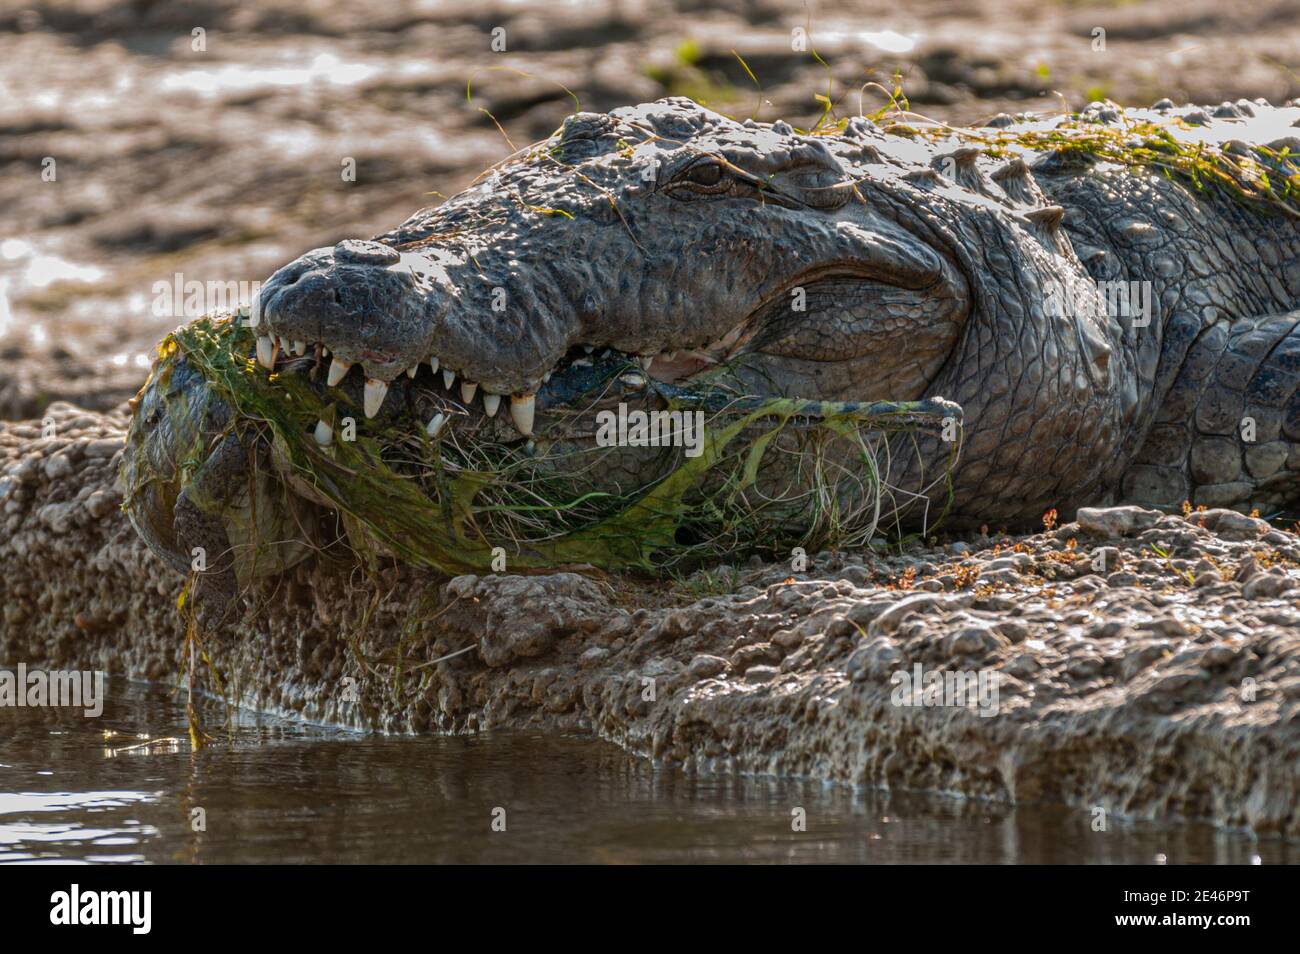 Agra, Uttar Pradesh, India - February 18, 2011: Chambal river. Closeup of huge crocodile with gharial in its mouth. Head of gharial in front. Stock Photo